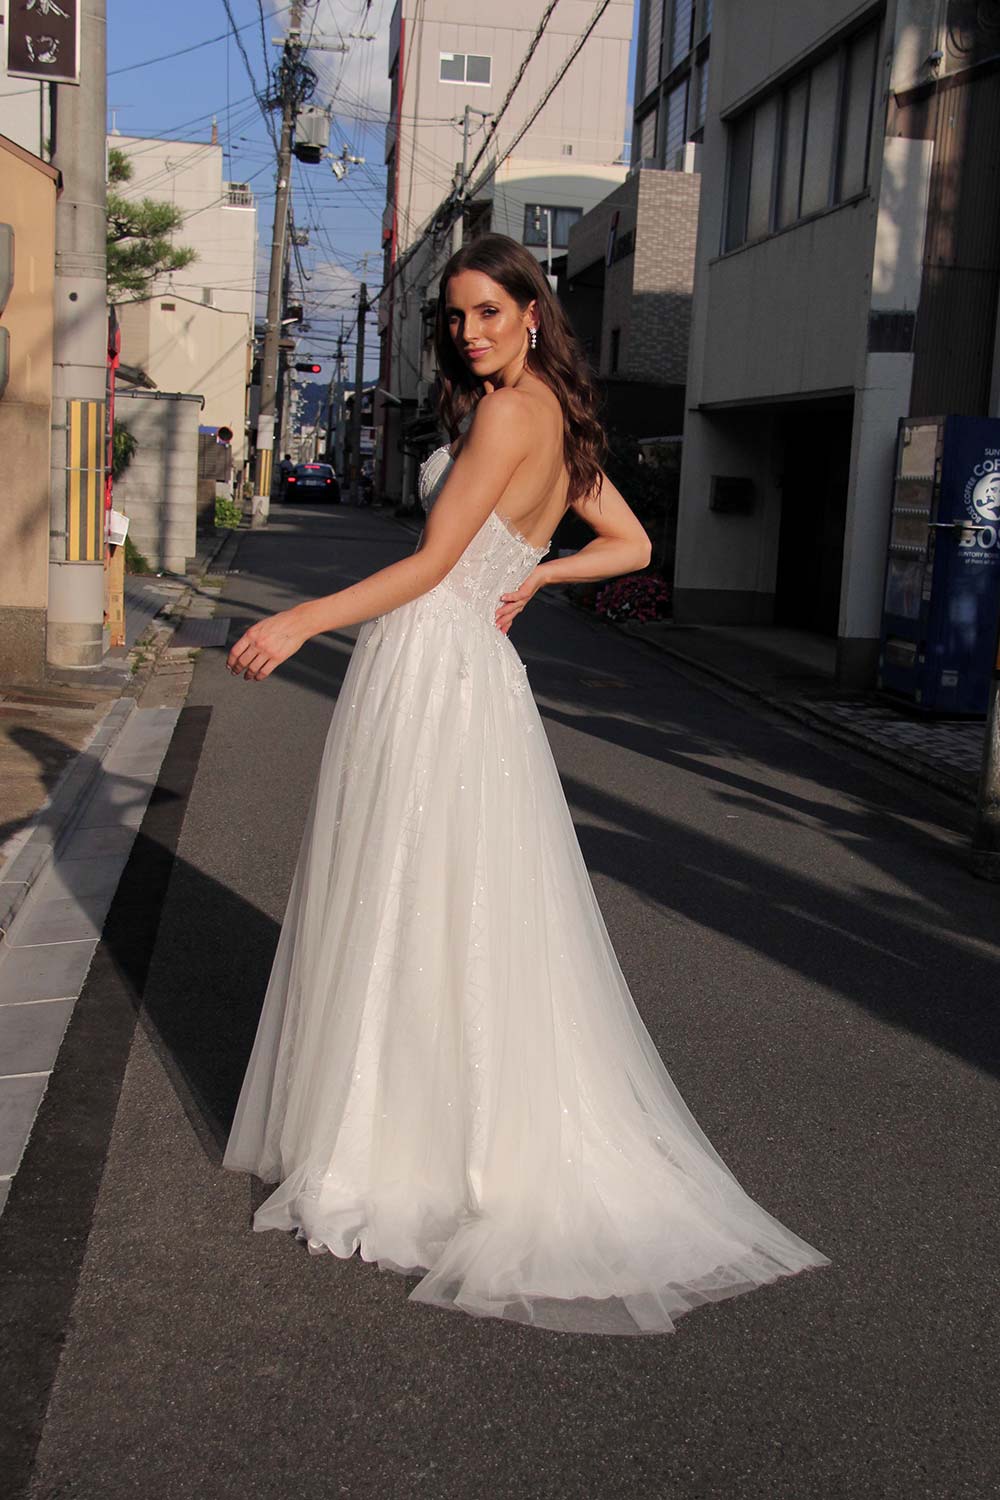 Female model wearing Vinka Design An Oriental Affair Wedding Dress. On a japanese street the side detail of a semi-sheer bodice with boning and hand-appliqued lace and skirt made with multiple layers of tulle